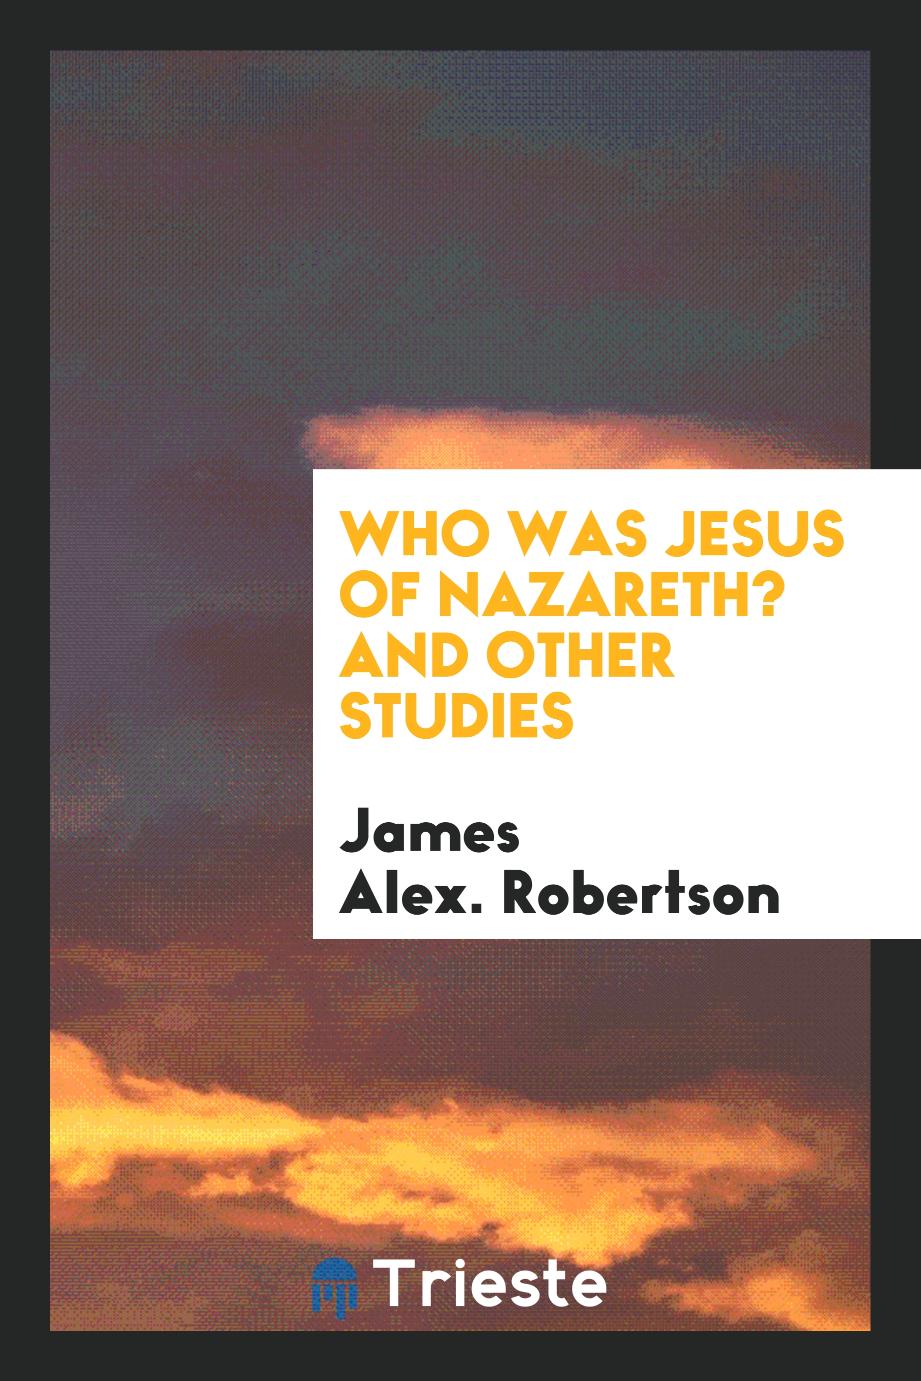 Who Was Jesus of Nazareth? And Other Studies